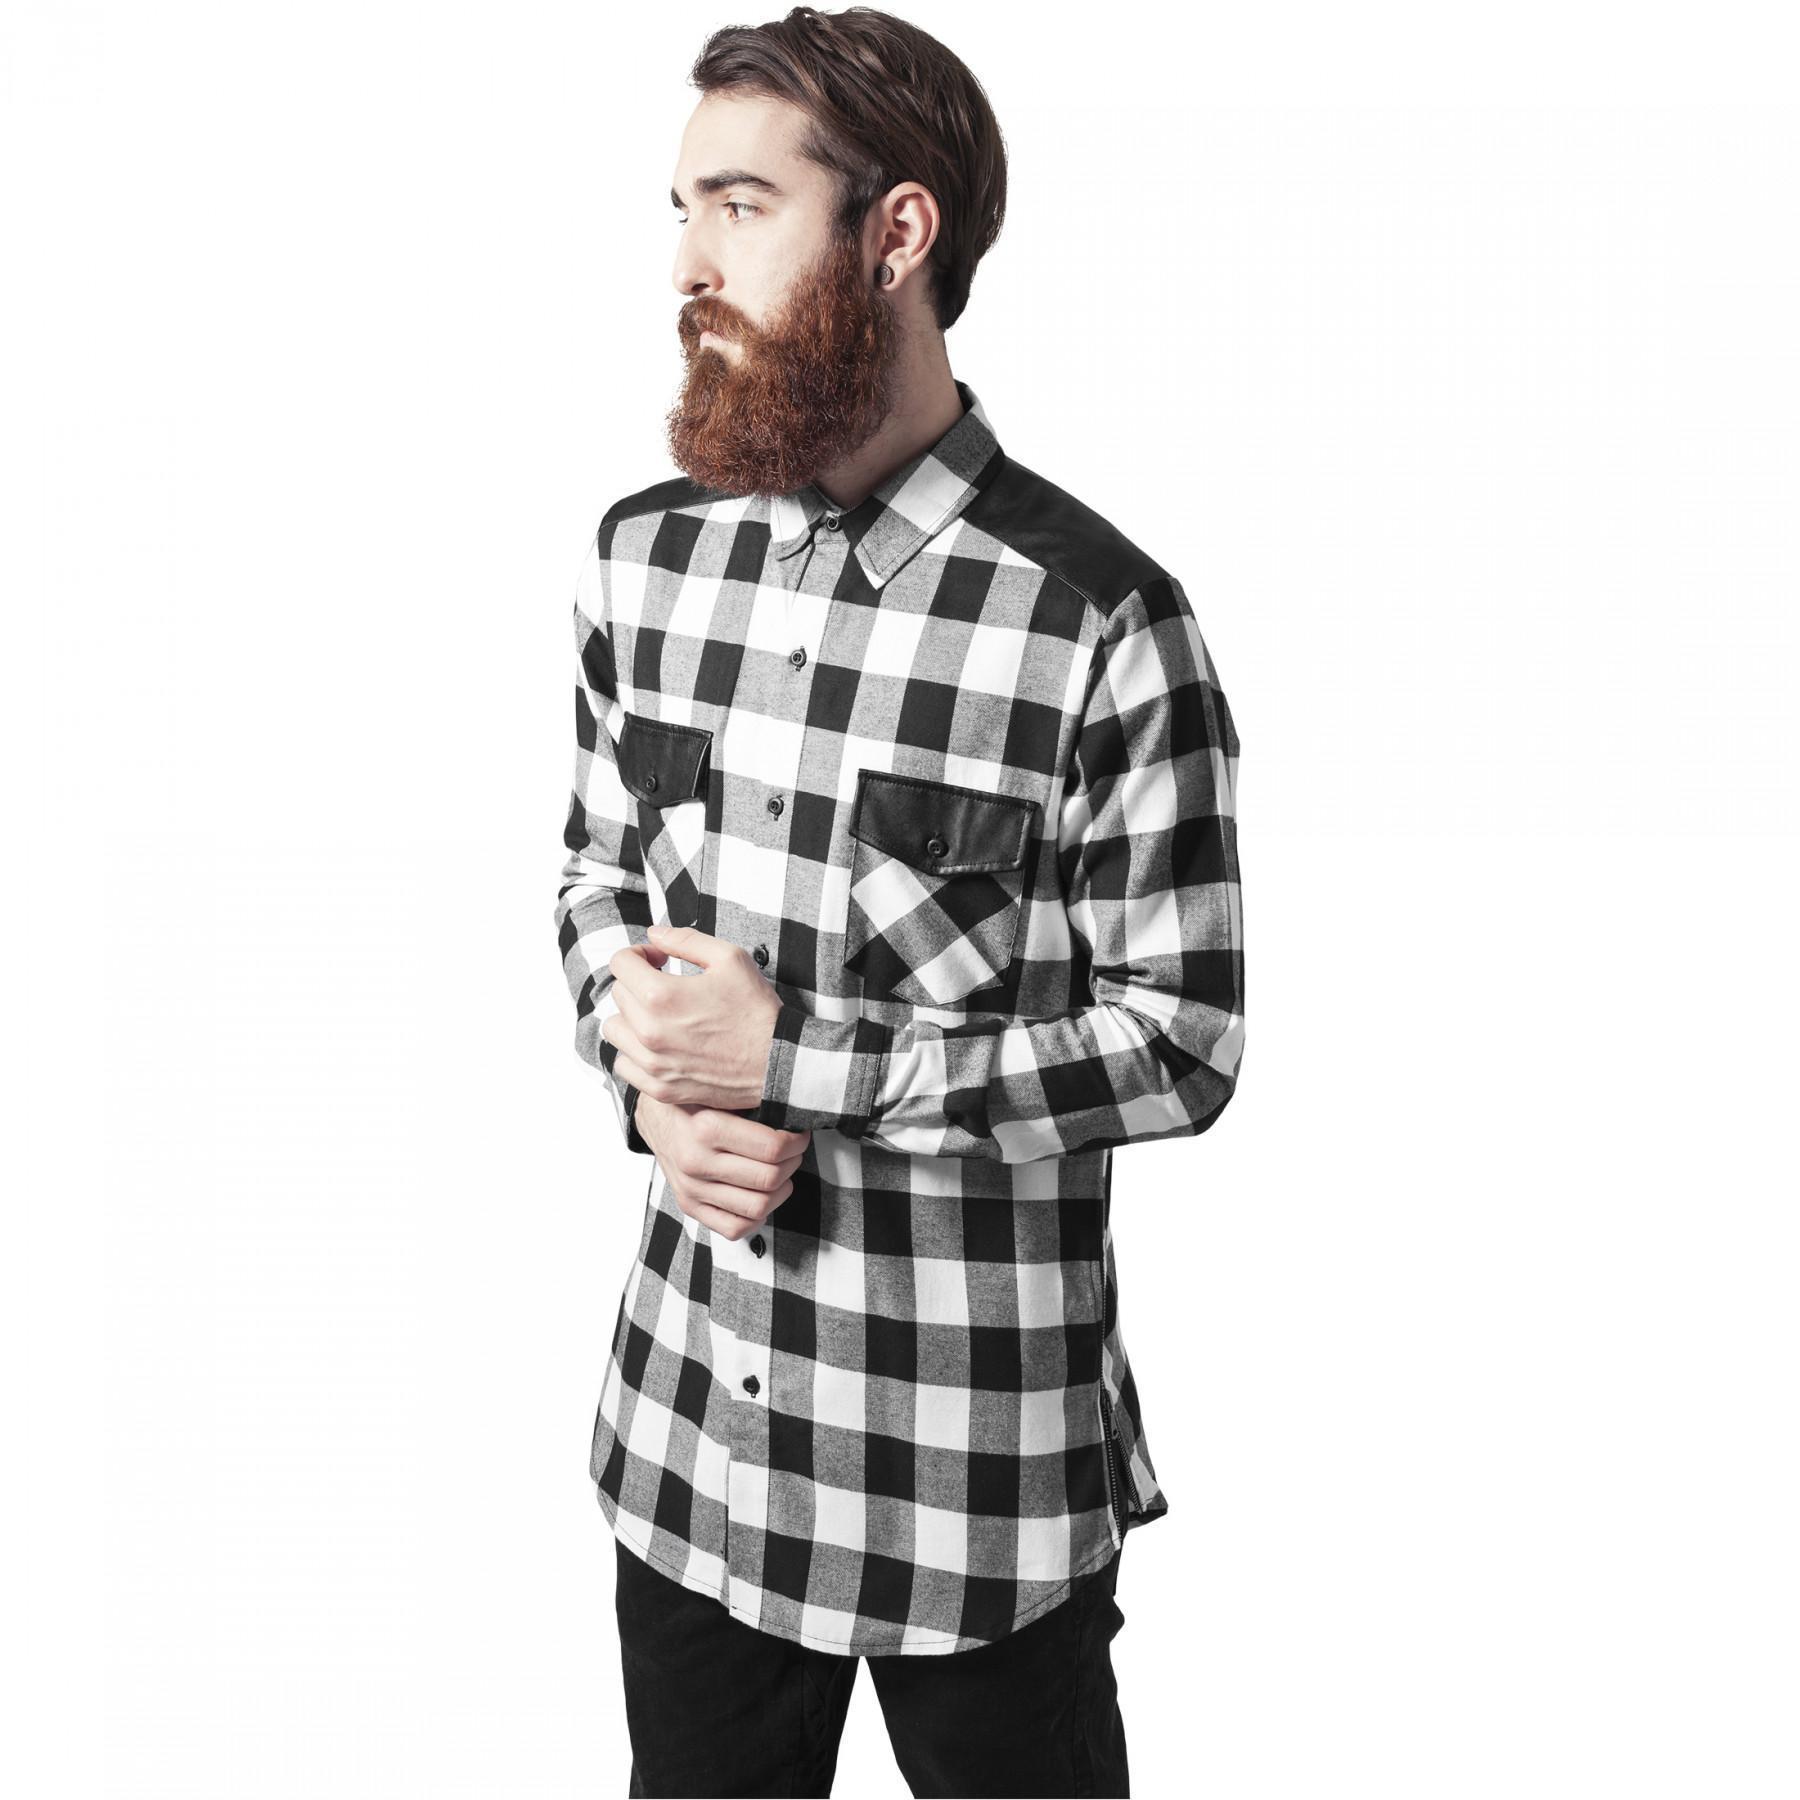 Shirt Urban Classic zip leather flannel